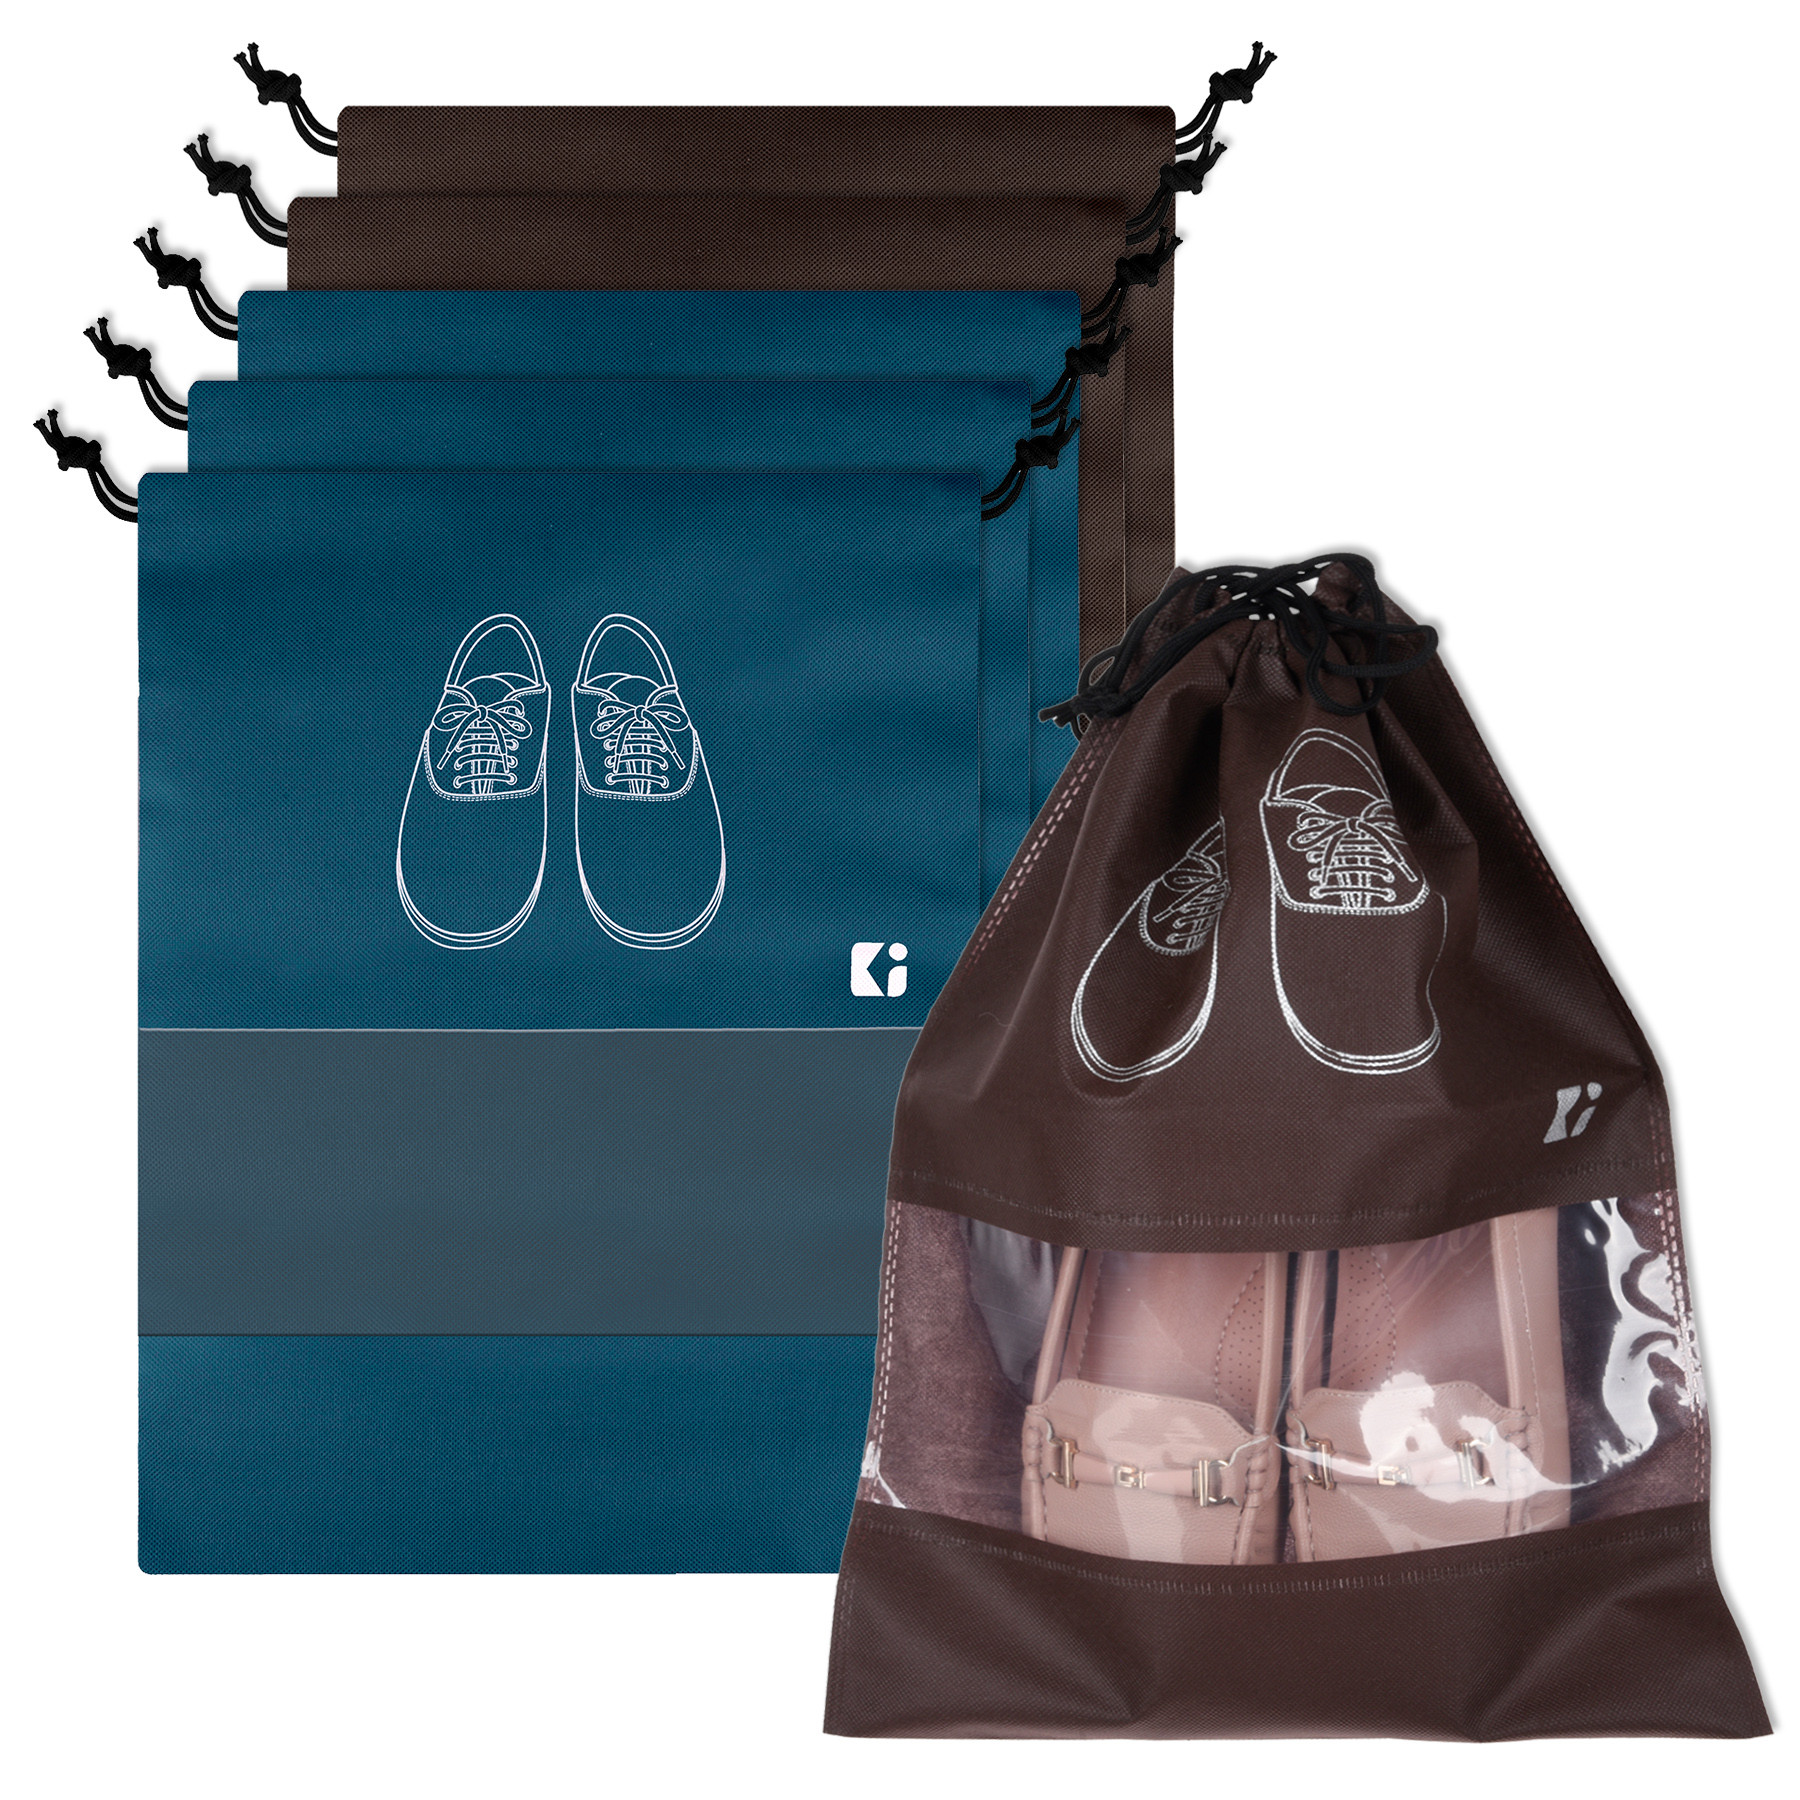 Kuber Industries Shoe Bags | Shoe Bags for Travel | Non-Woven Shoe Storage Bags | Storage Organizers Set | Shoe Cover with Transparent Window | Shoe Dori Cover | Navy Blue & Coffee